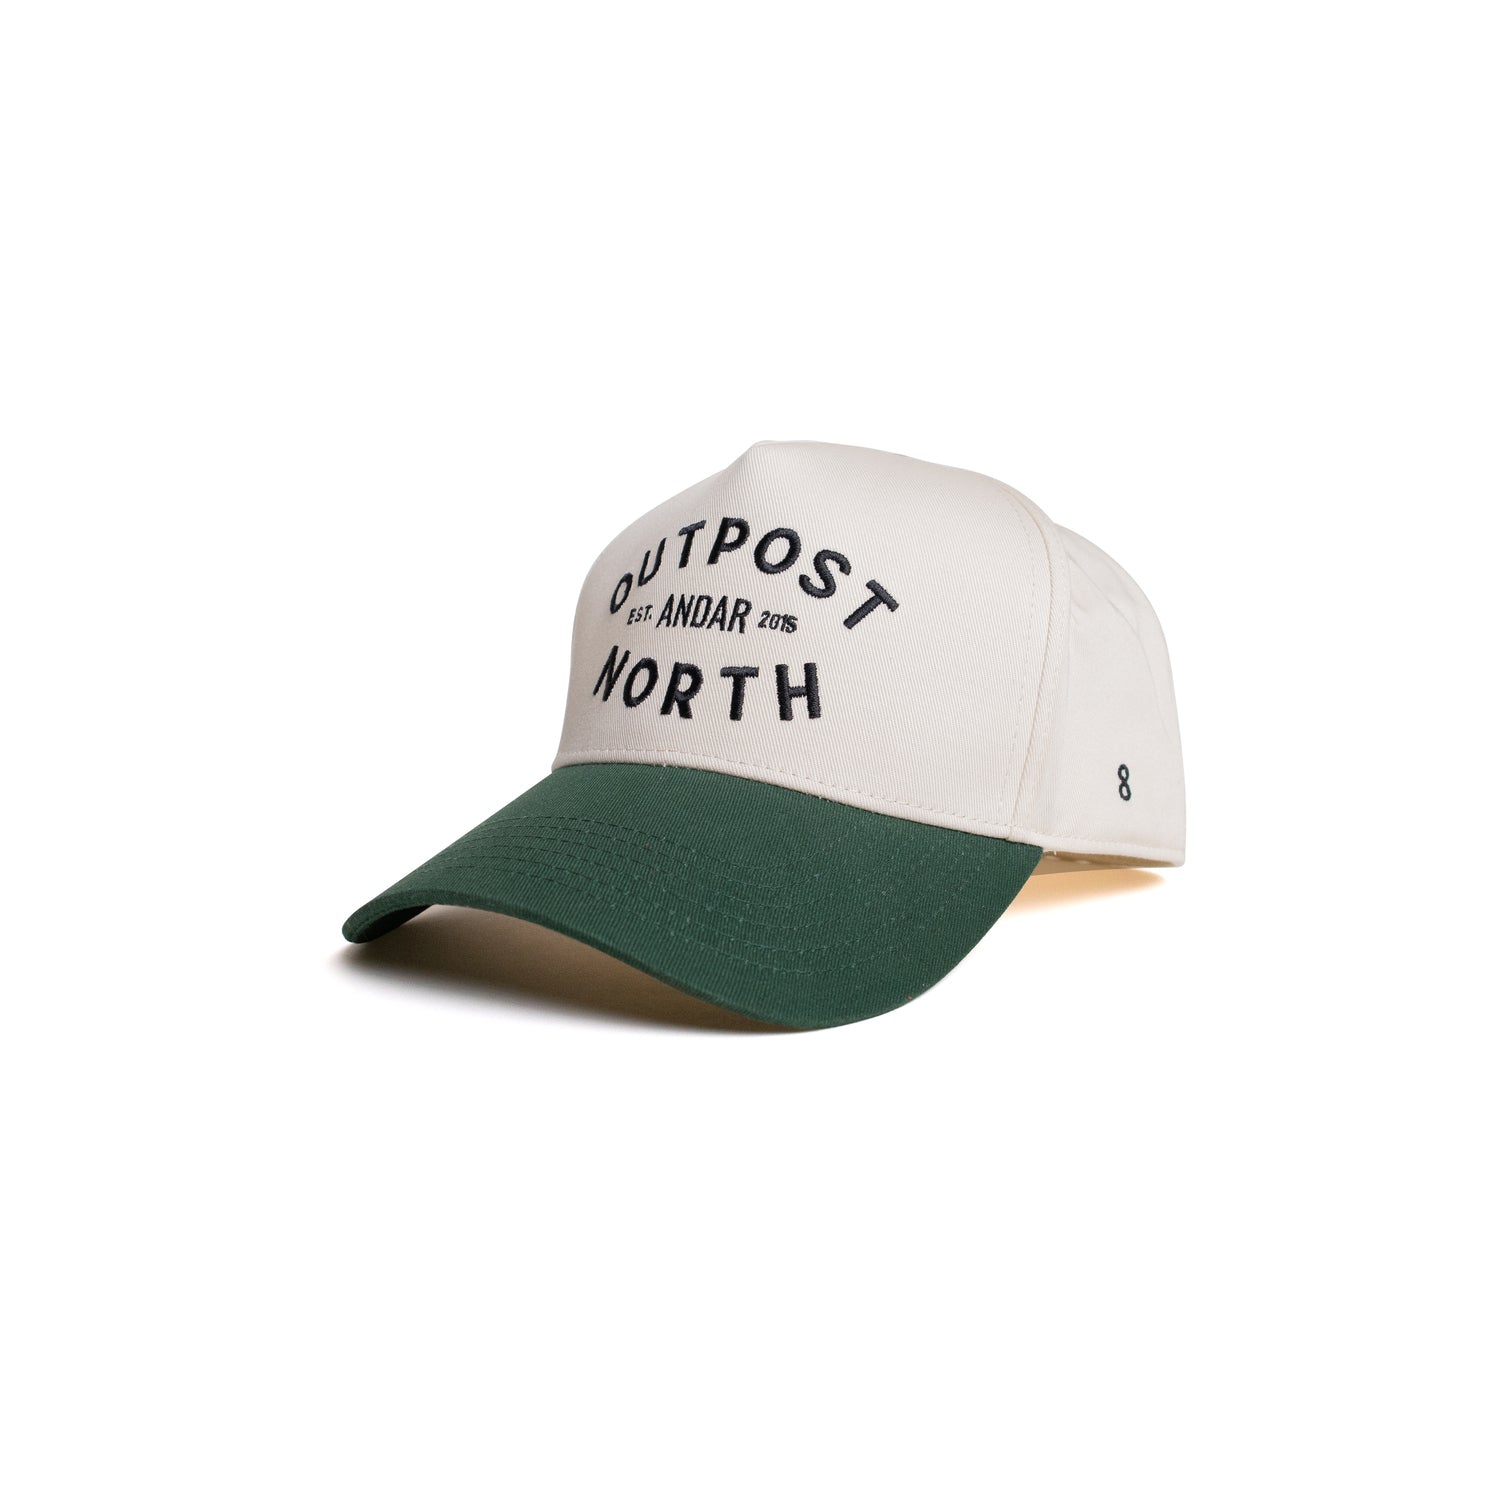 The Outpost North Hat